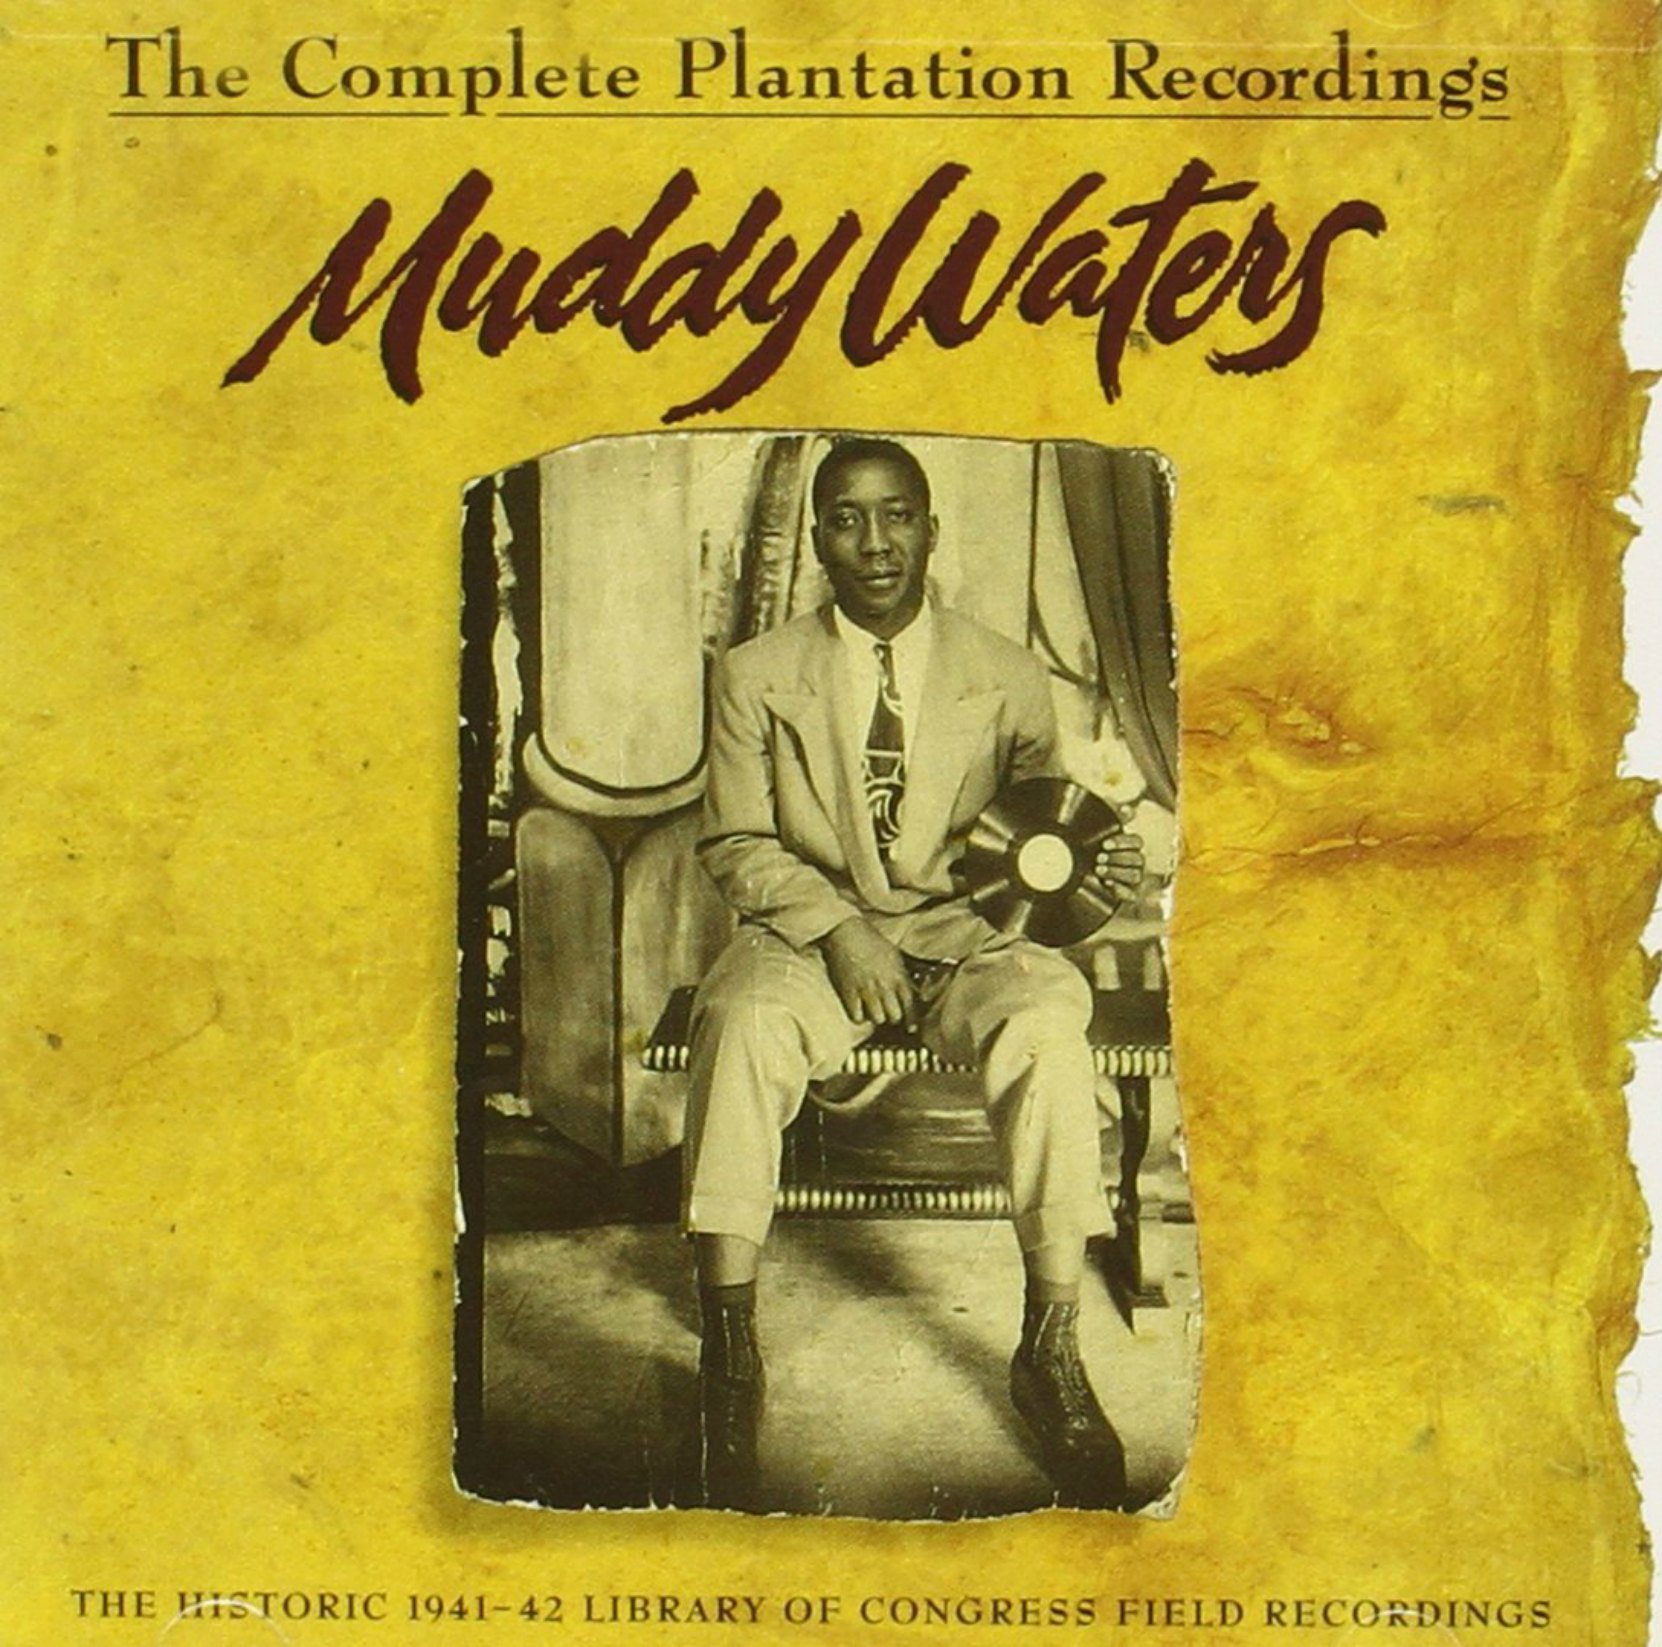 CD cover, Muddy Waters - The Complete Plantation Recordings contains all the Muddy Waters sides recorded by Alan Lomax at Stovall Farms in 1941-42.